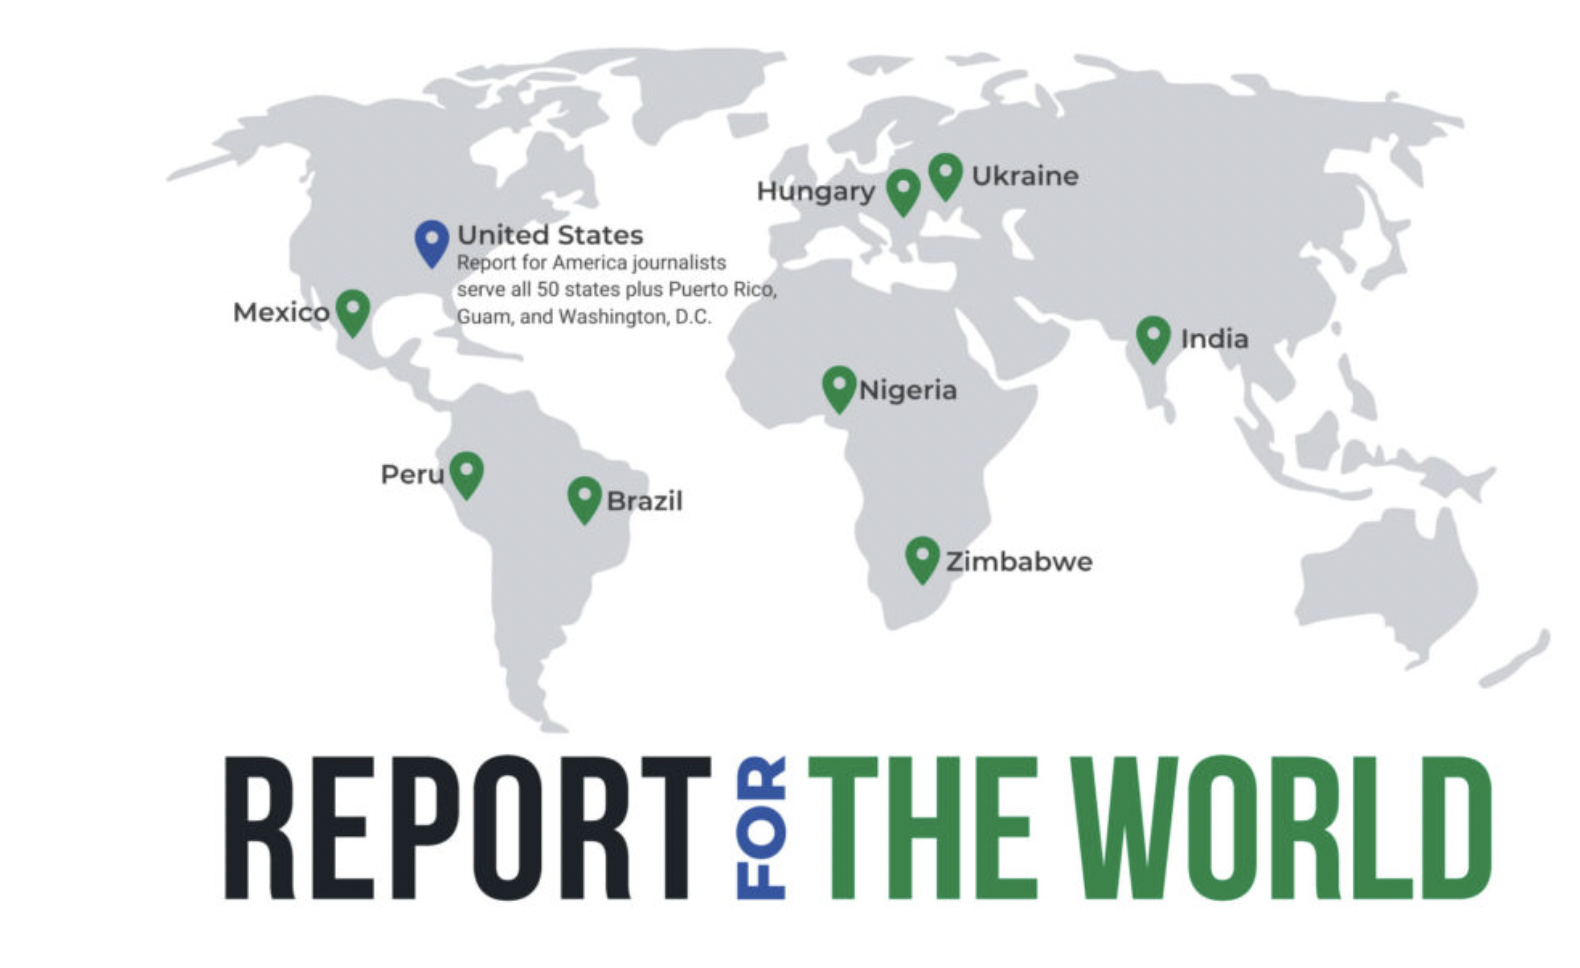 Report for the World Picks FIJ To Join Its Global Network of Independent Newsrooms